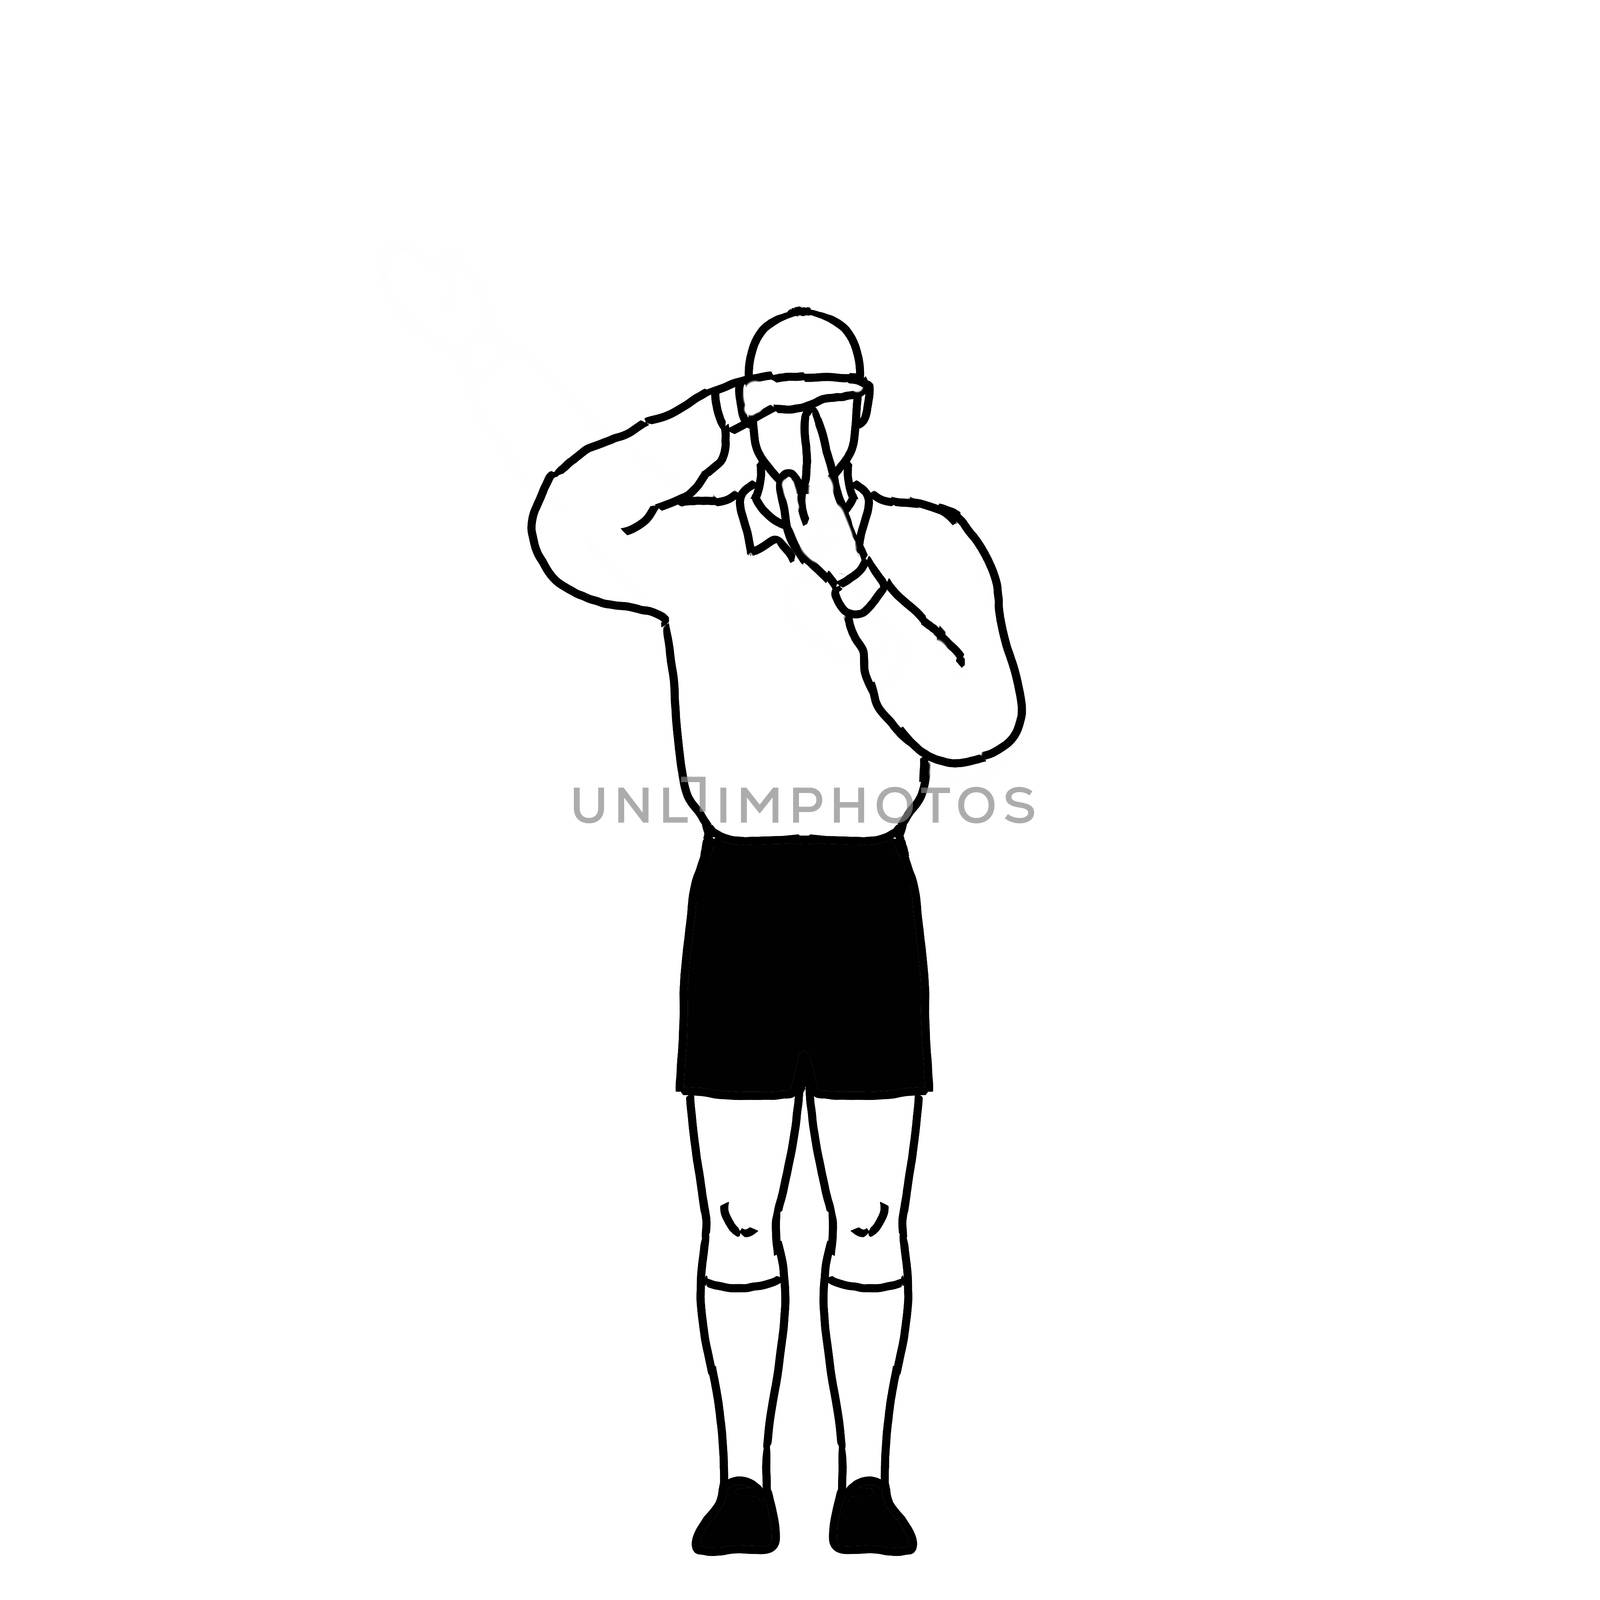 Retro style line drawing illustration showing a rugby referee with penalty refer to TV Match Official hand signal on isolated background in black and white.